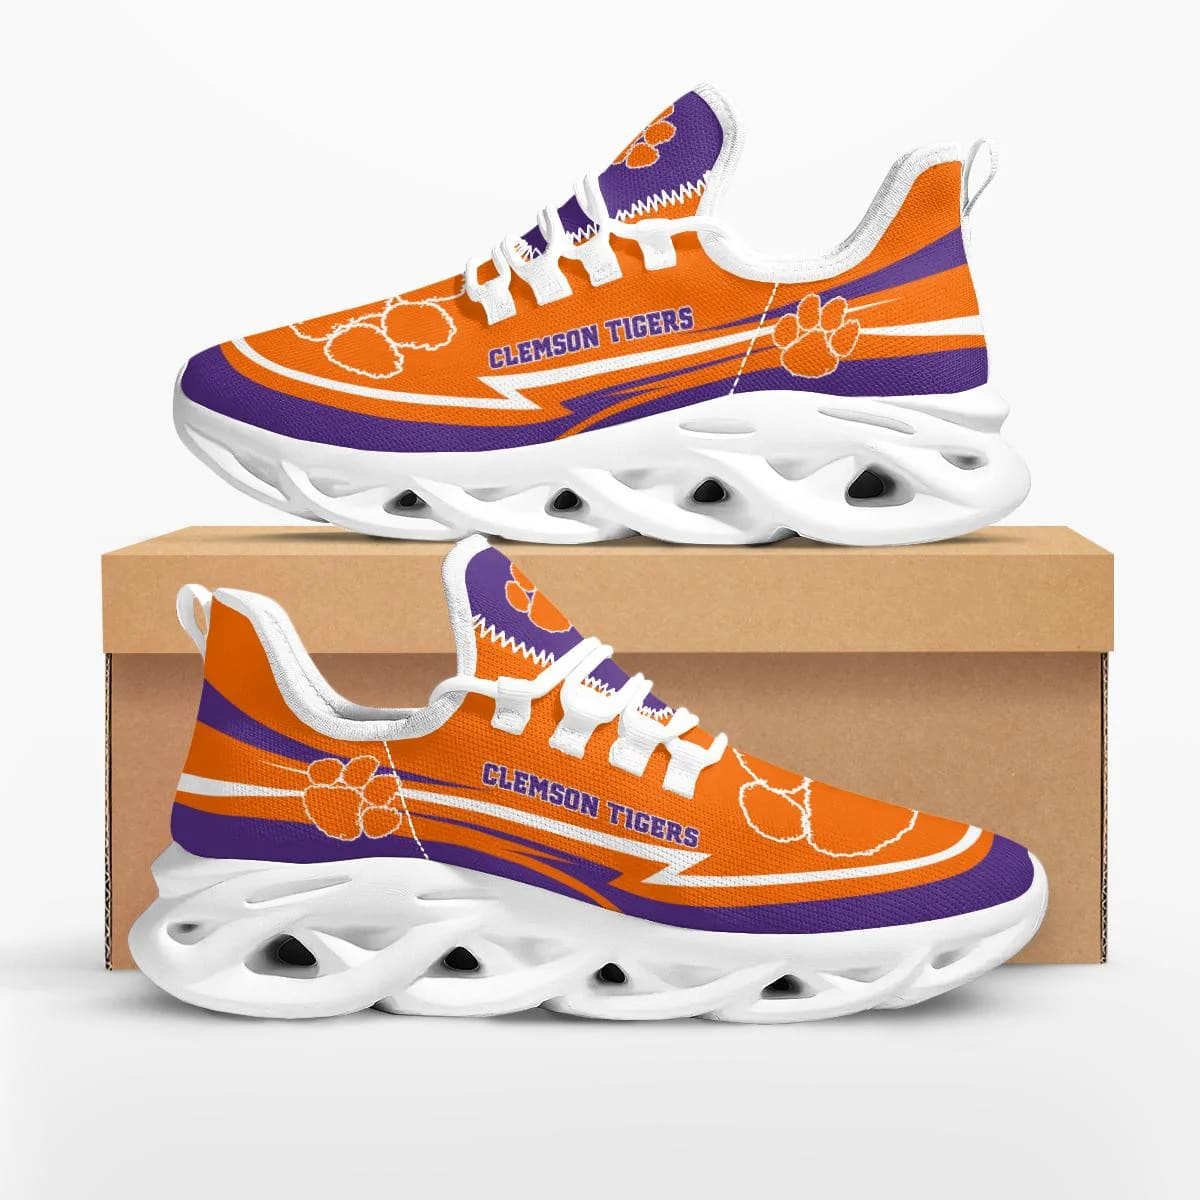 NCAA Clemson Tigers Are Coming Curves Max Soul Shoes Zvtz8q.jpg